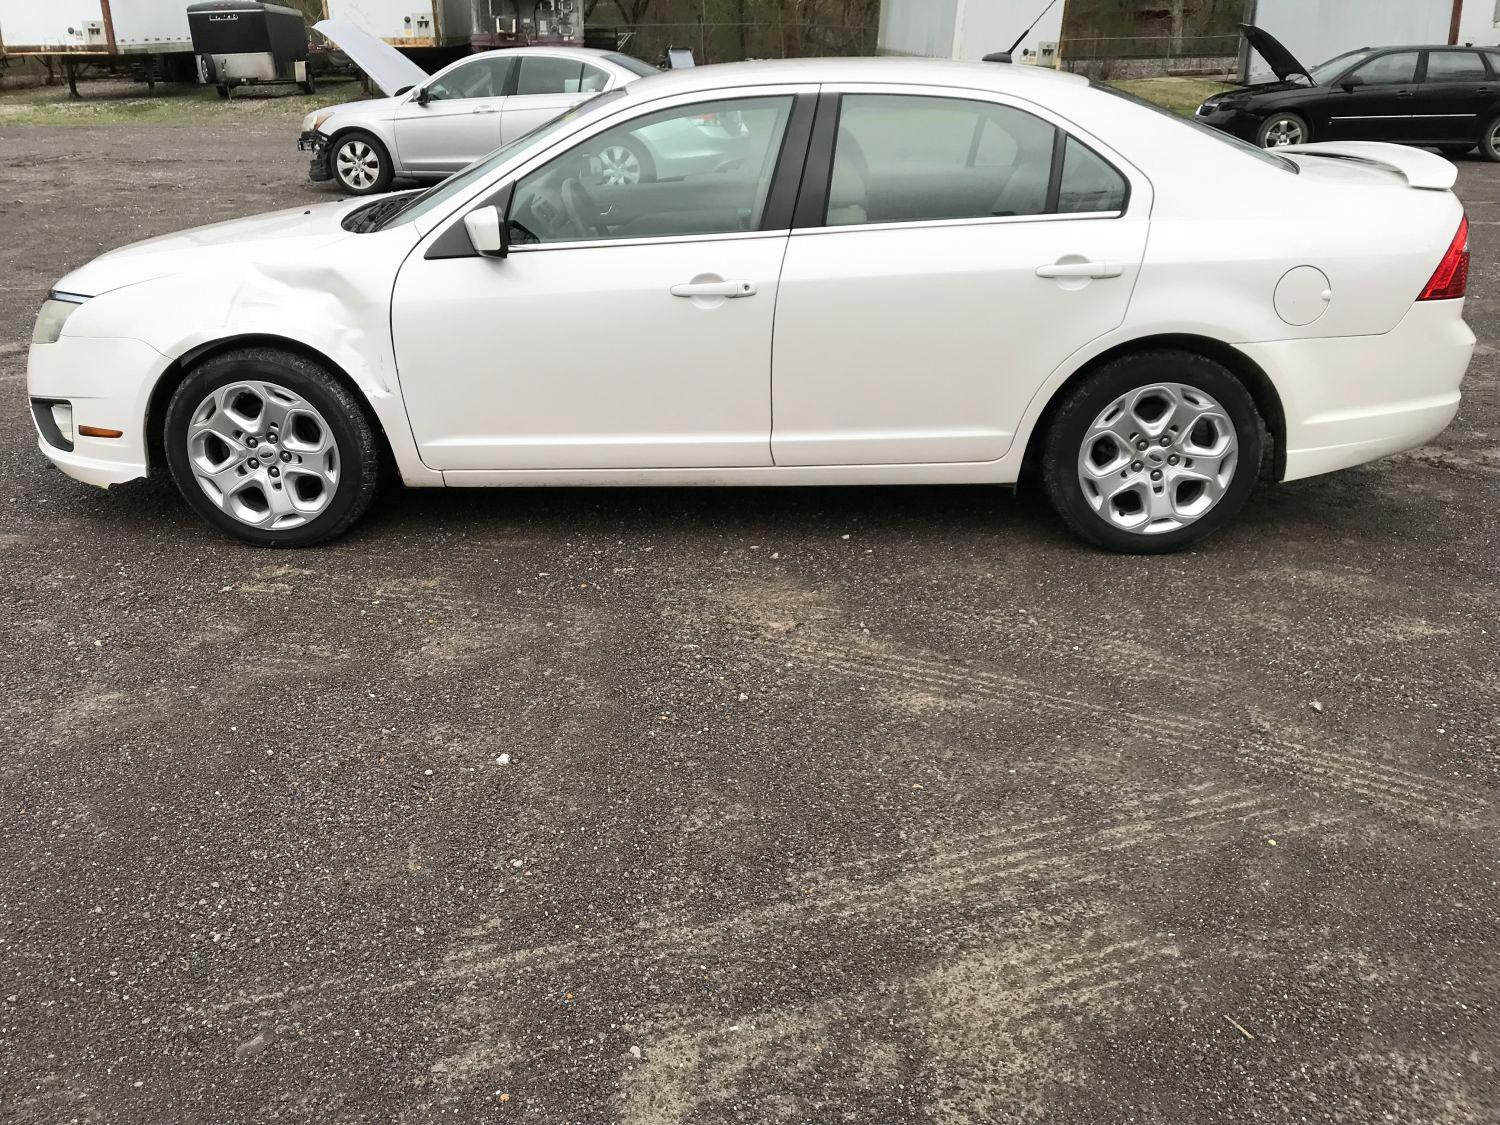 2010 Ford Fusion SE 4-door pearl white sedan, 158608mi, 2.5 liter 4 cylinder gas engine, automatic t